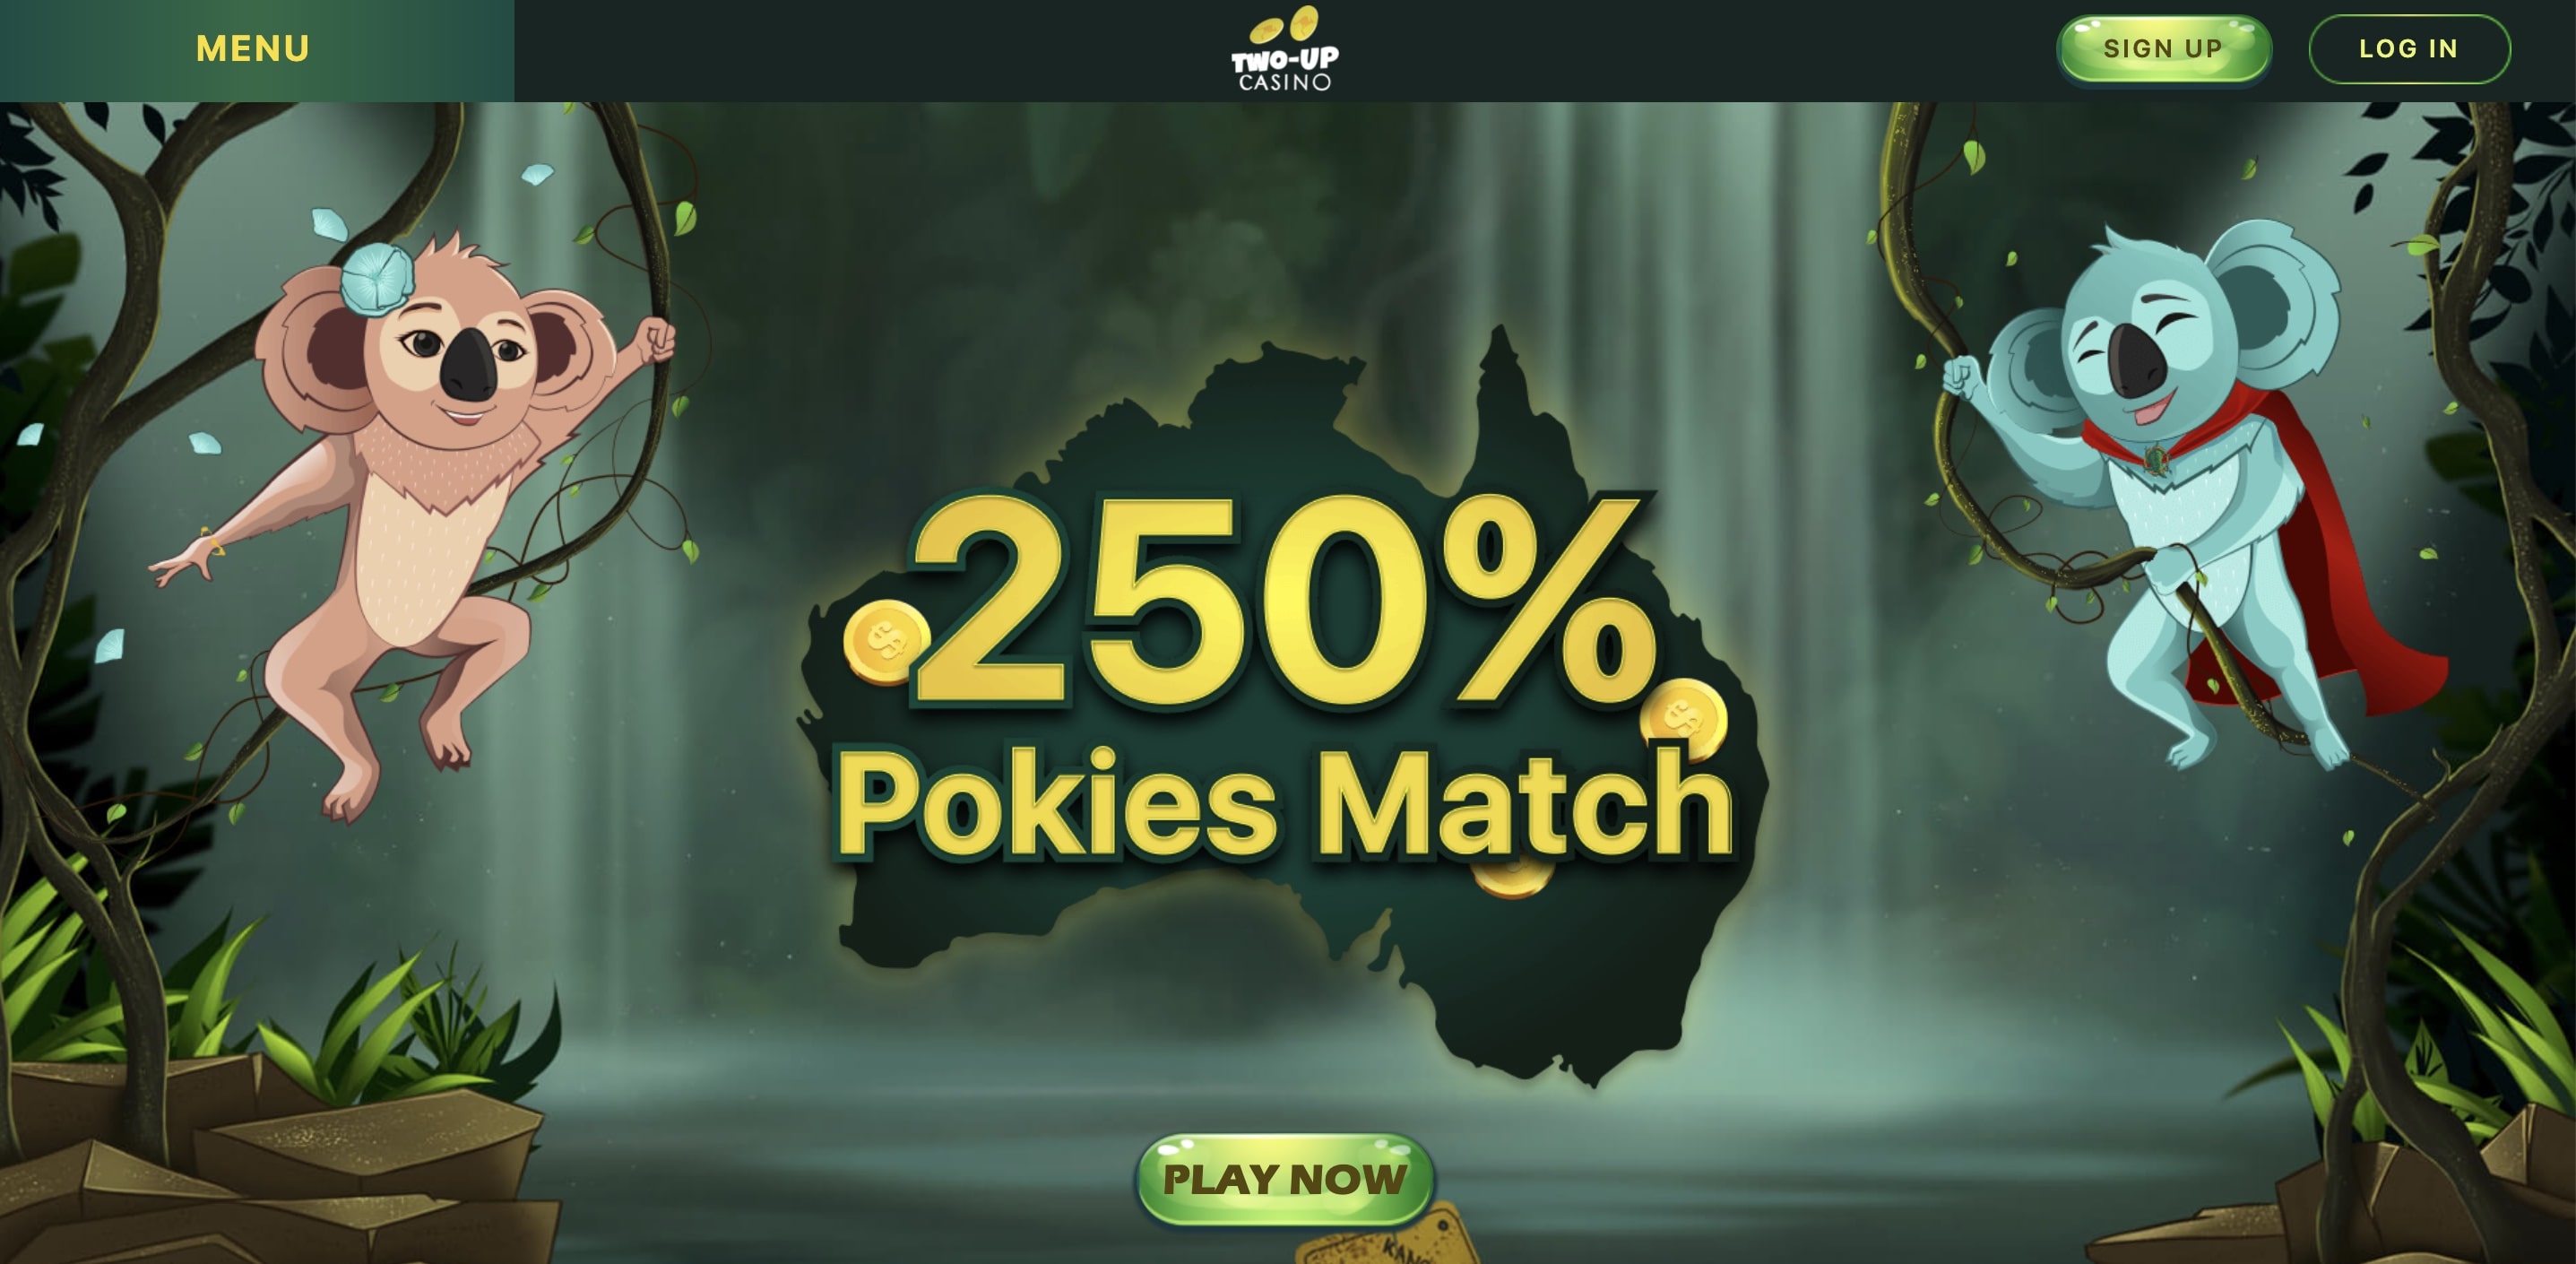 two up casino homepage